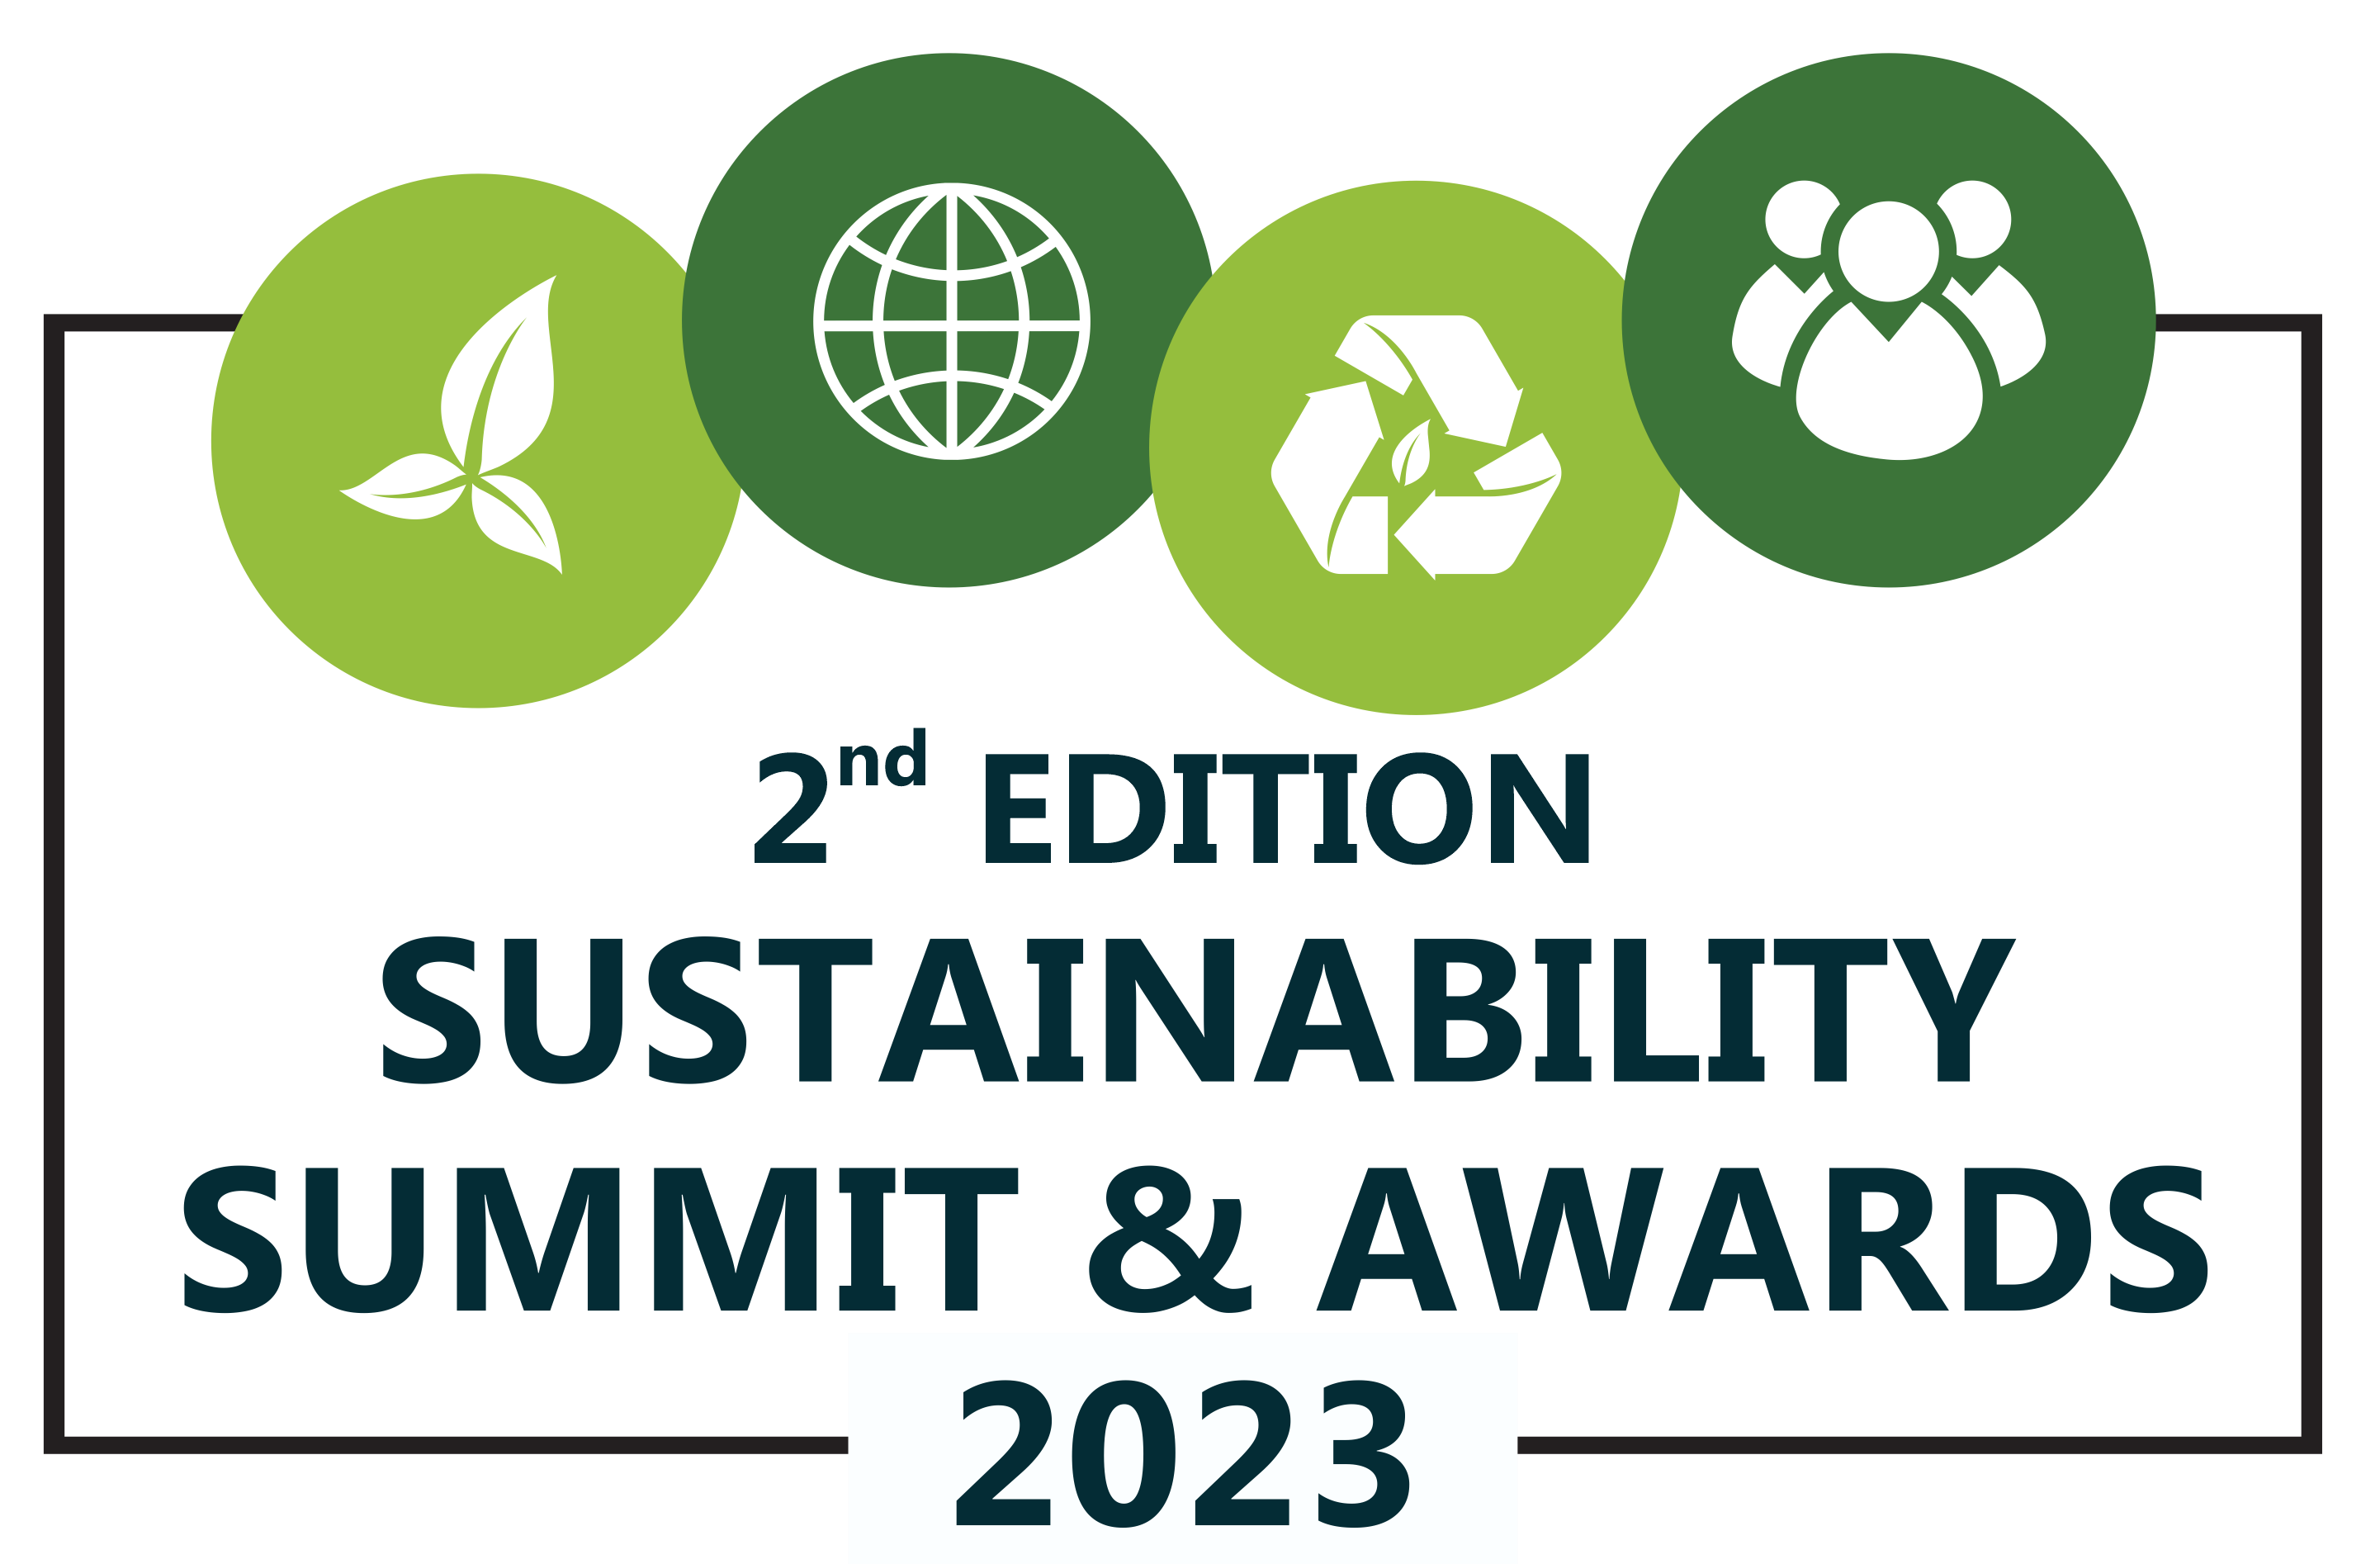 2nd Edition Sustainability Summit and Awards 2023